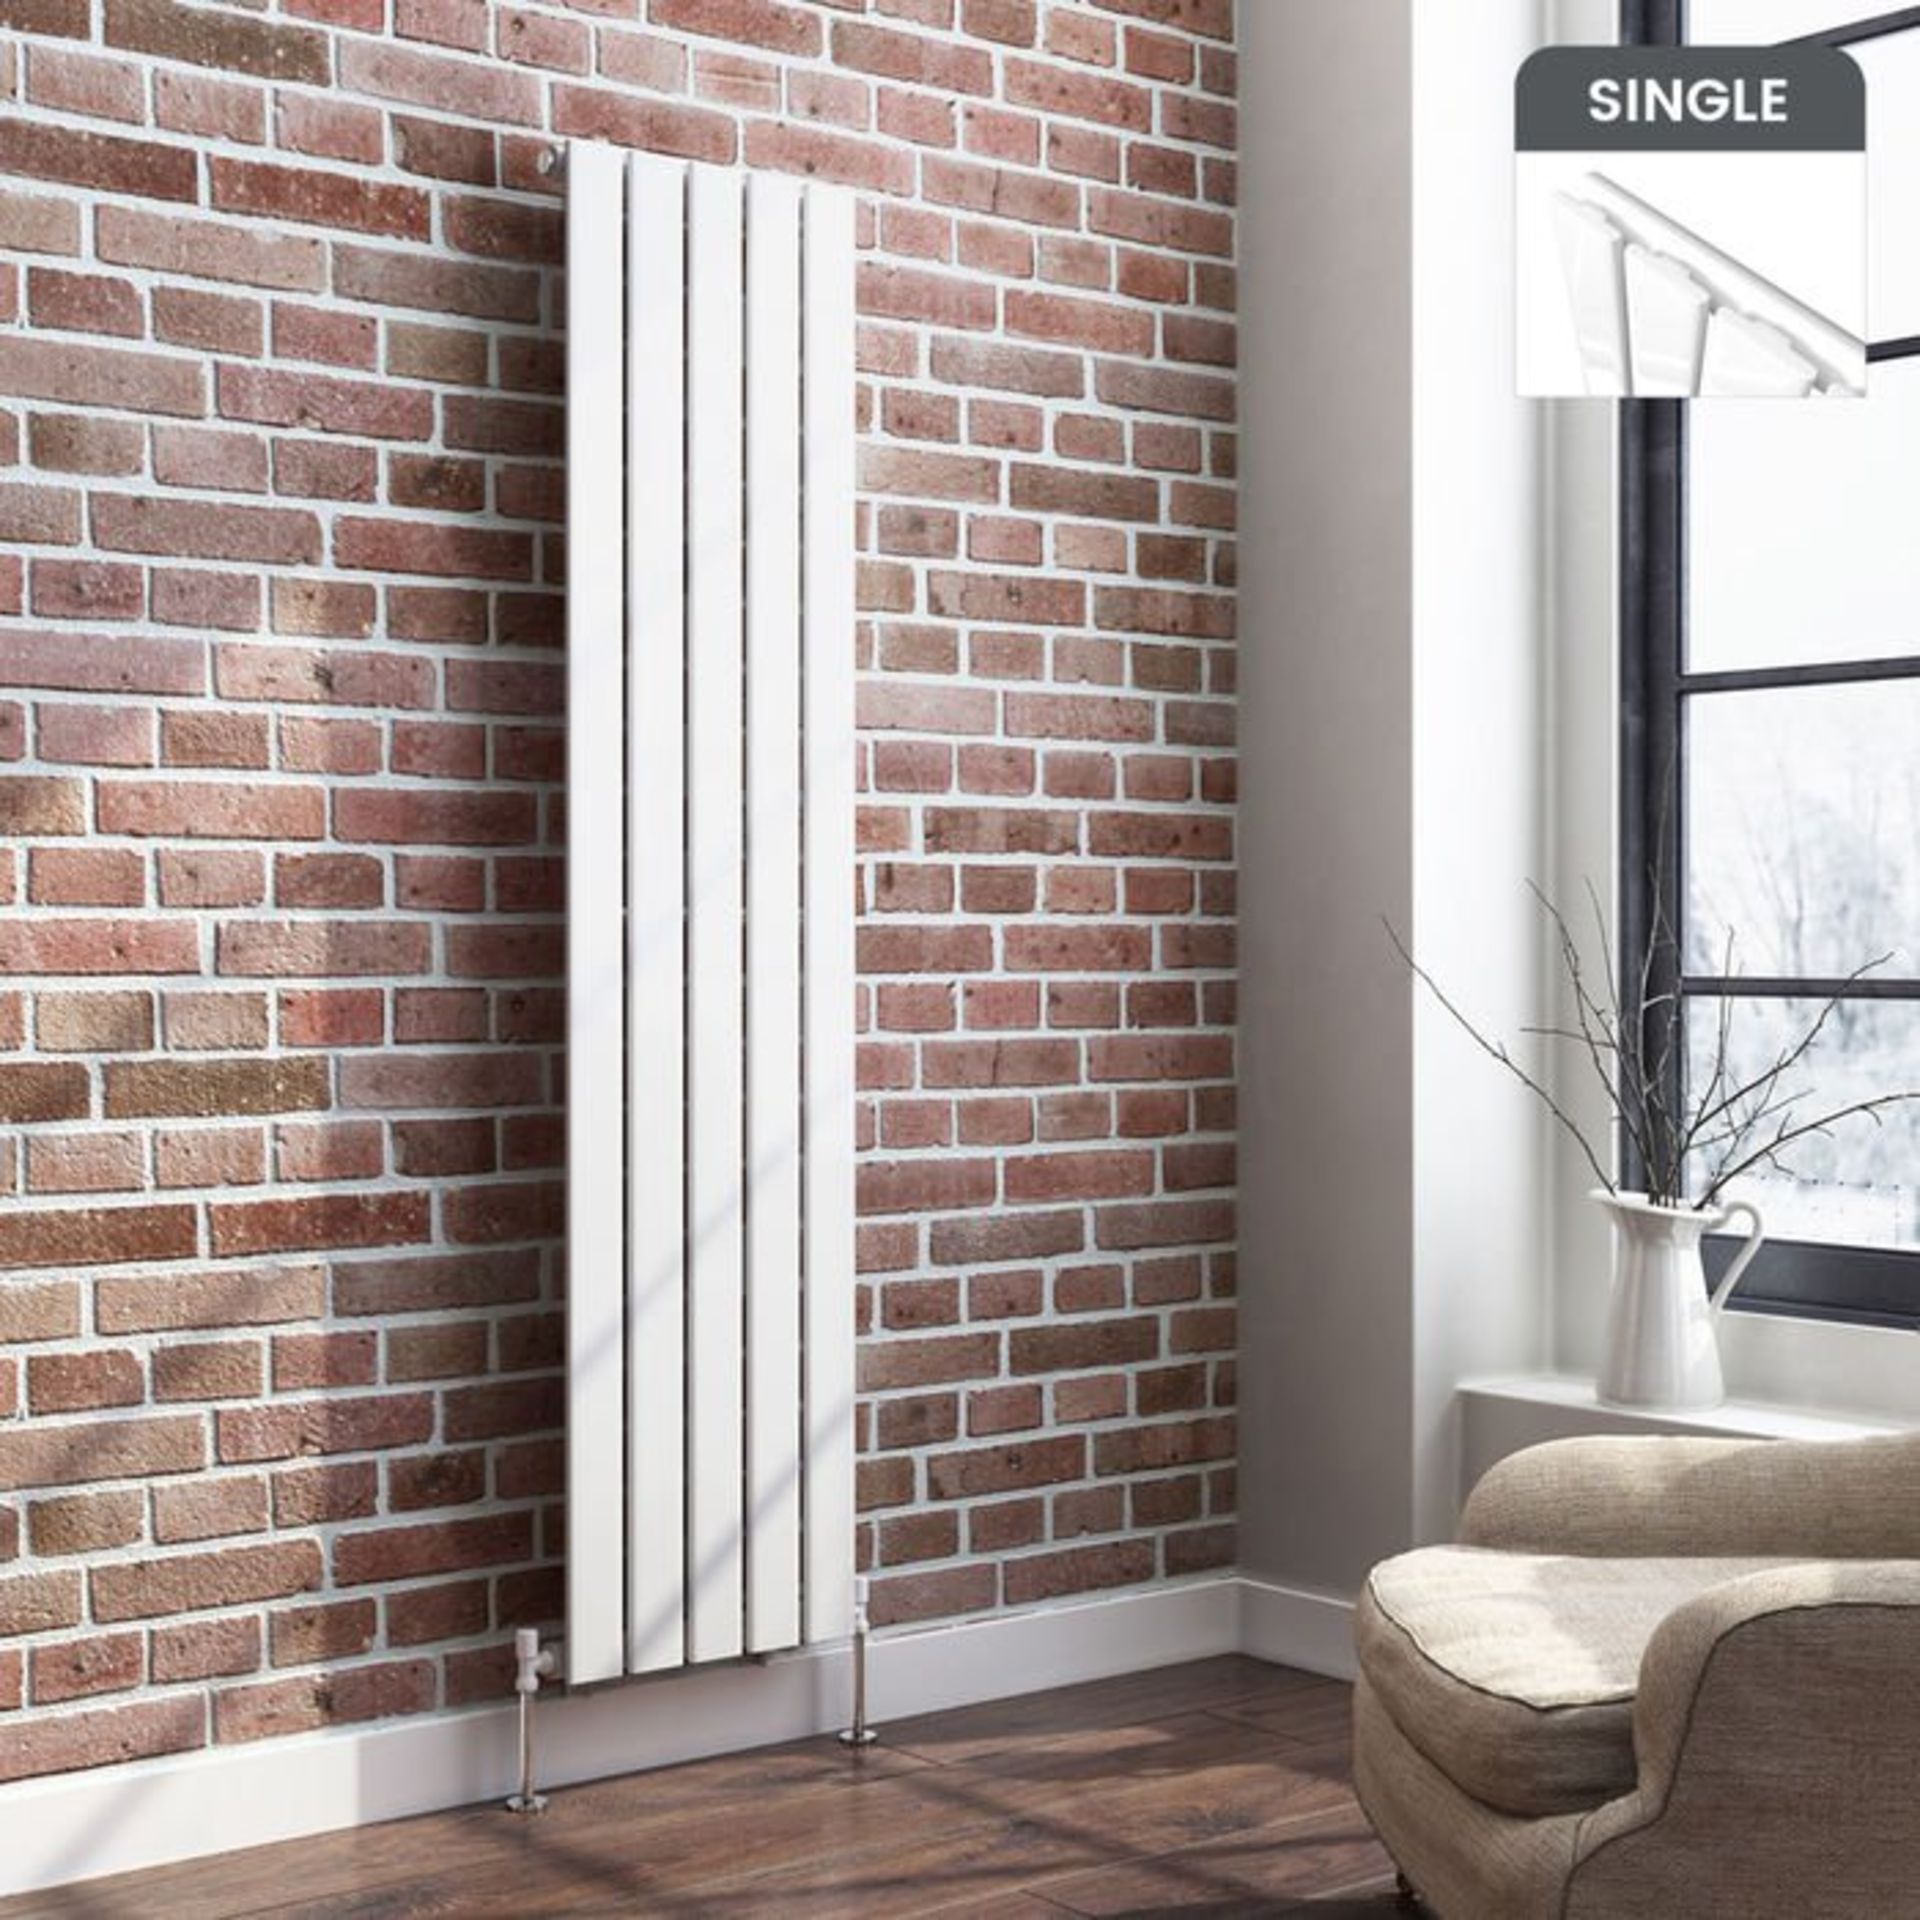 (S119) 1600x376mm Gloss White Single Flat Panel Vertical Radiator RRP £175.99 Low carbon steel, high